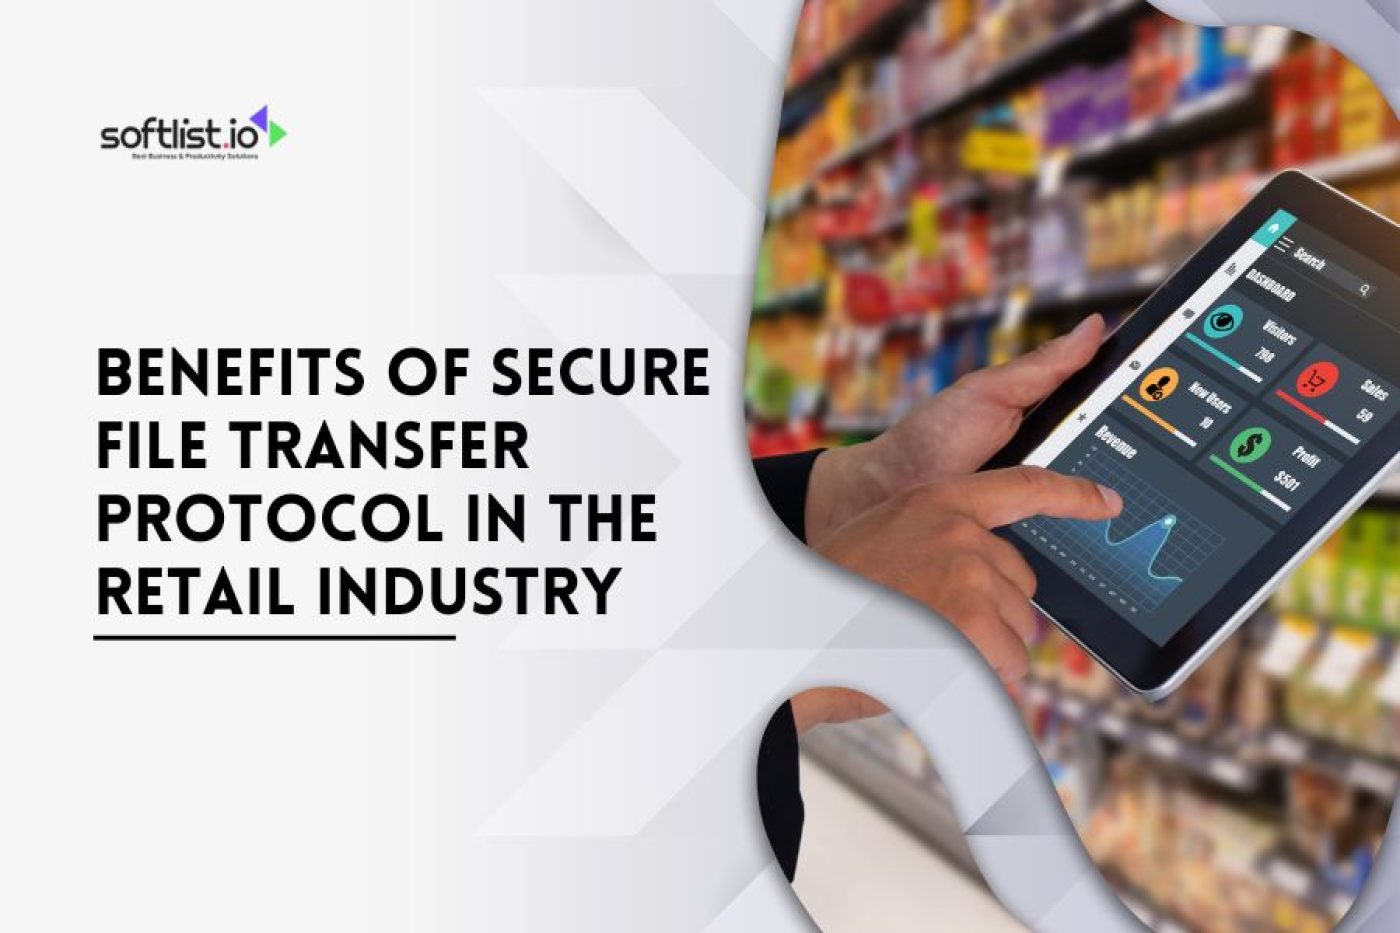 Benefits of Secure File Transfer Protocol in the Retail Industry